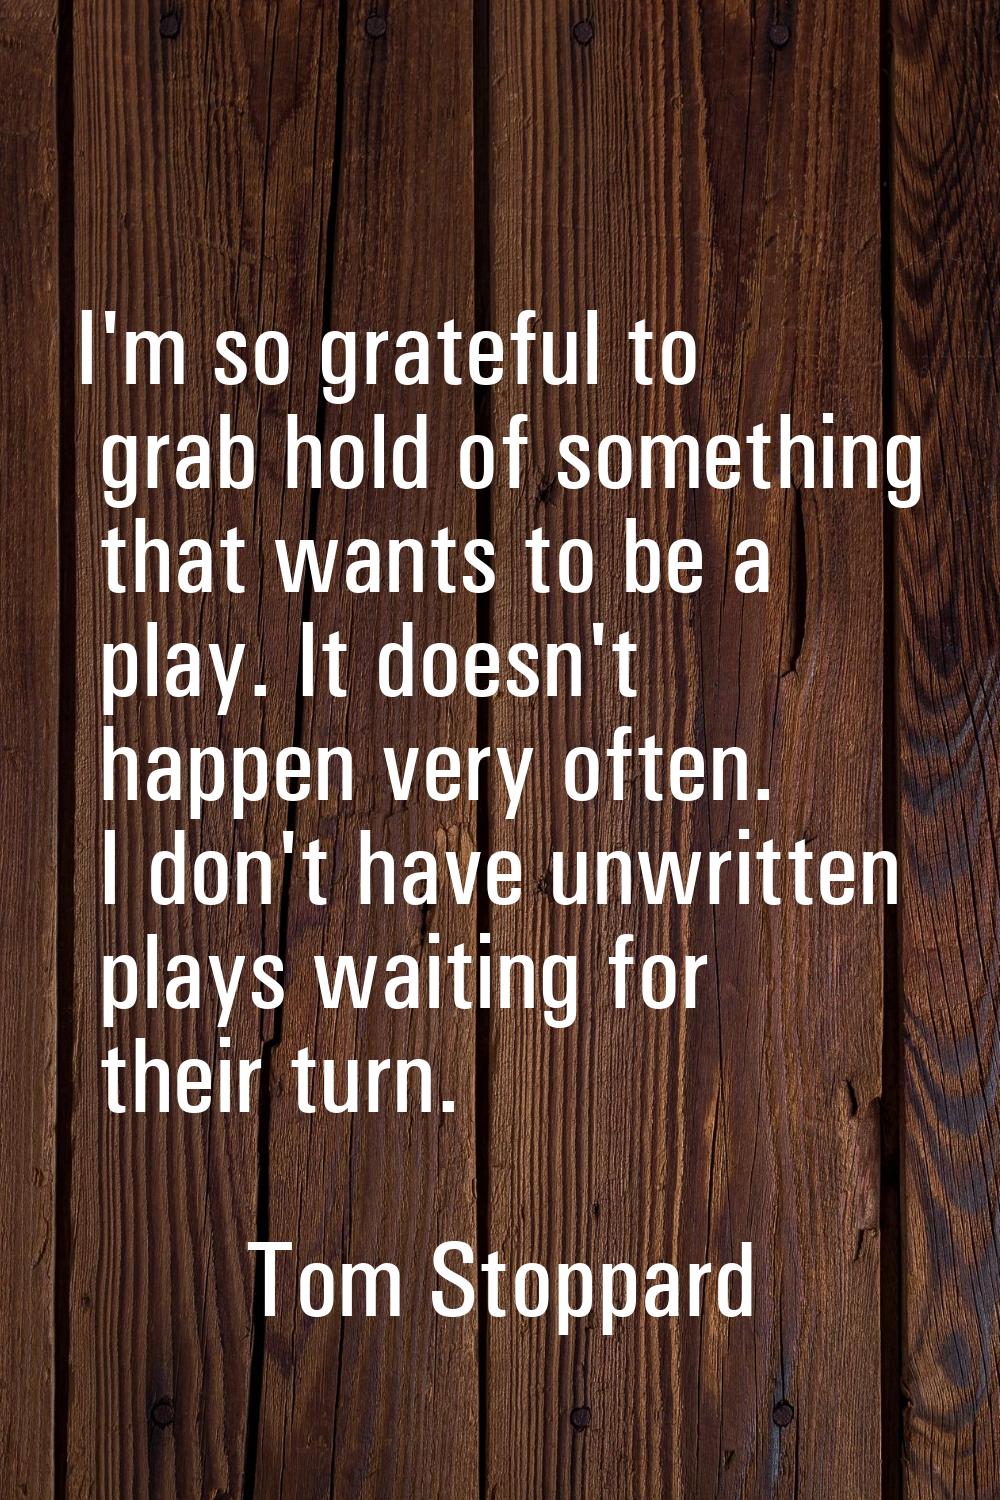 I'm so grateful to grab hold of something that wants to be a play. It doesn't happen very often. I 